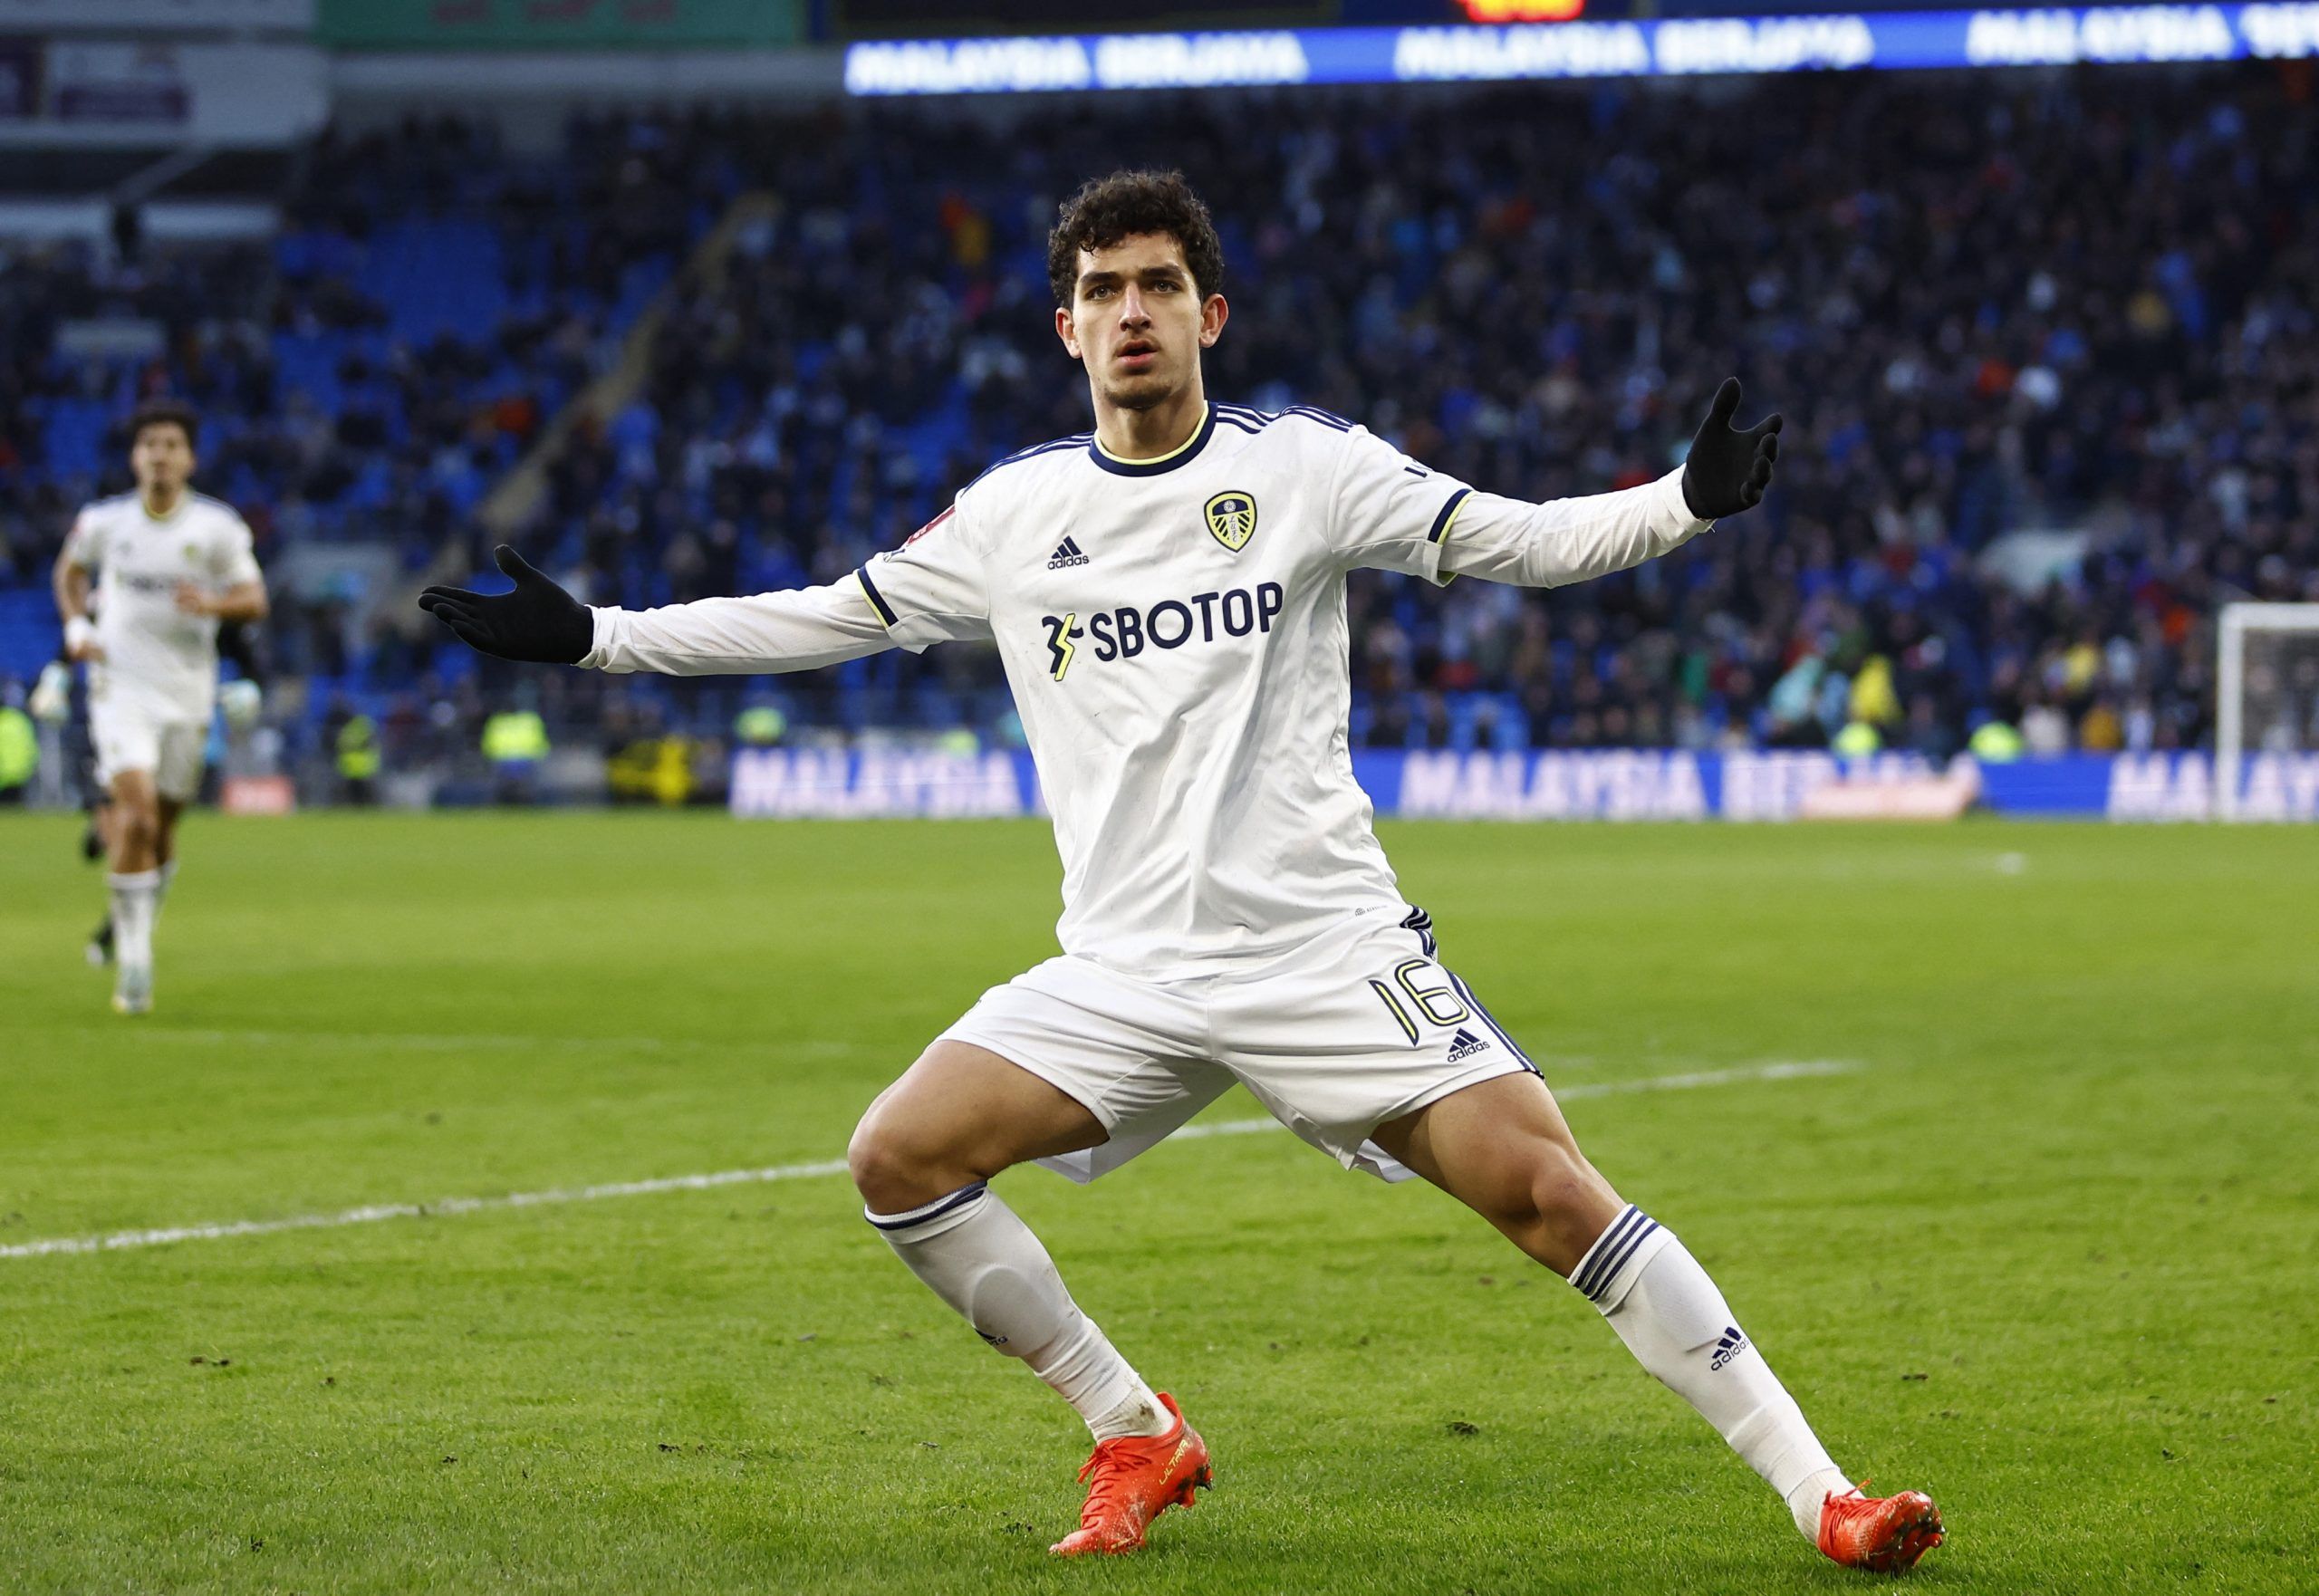 Soccer Football - FA Cup Third Round - Cardiff City v Leeds United - Cardiff City Stadium, Cardiff, Britain - January 8, 2023 Leeds United's Sonny Perkins celebrates scoring their second goal Action Images via Reuters/Peter Cziborra